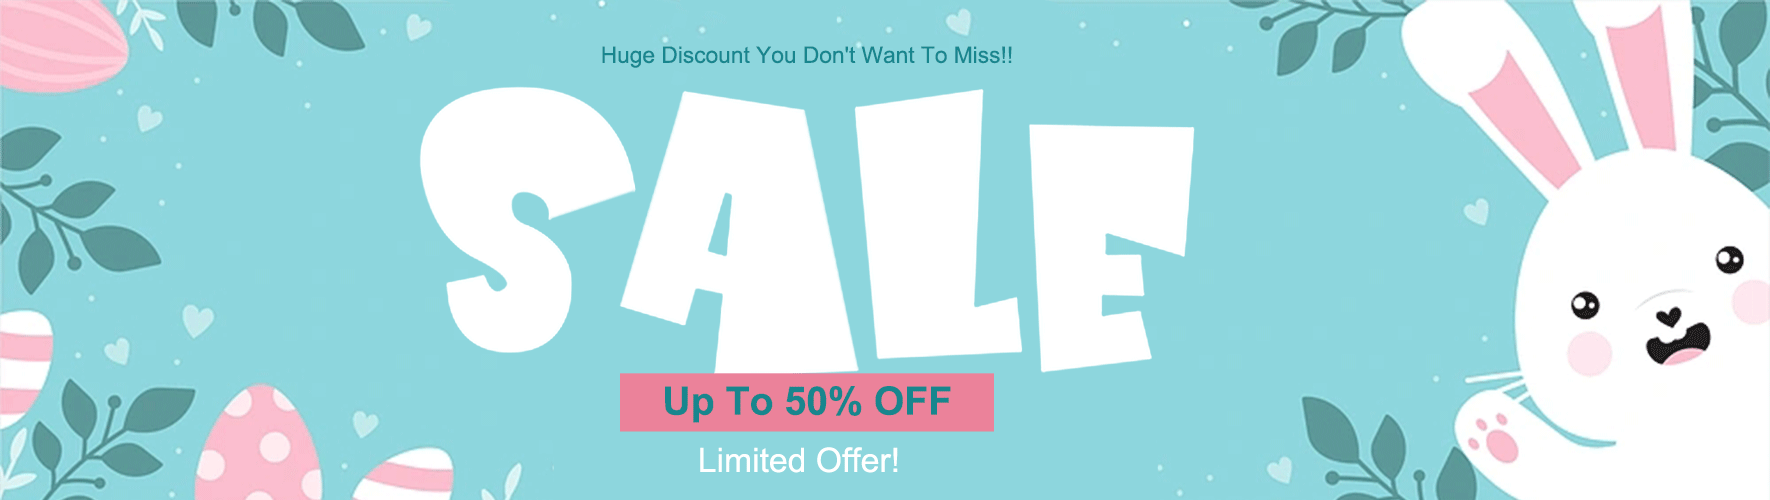 Huge Discount You Don't Want To Miss!! Up To 50% OFF.